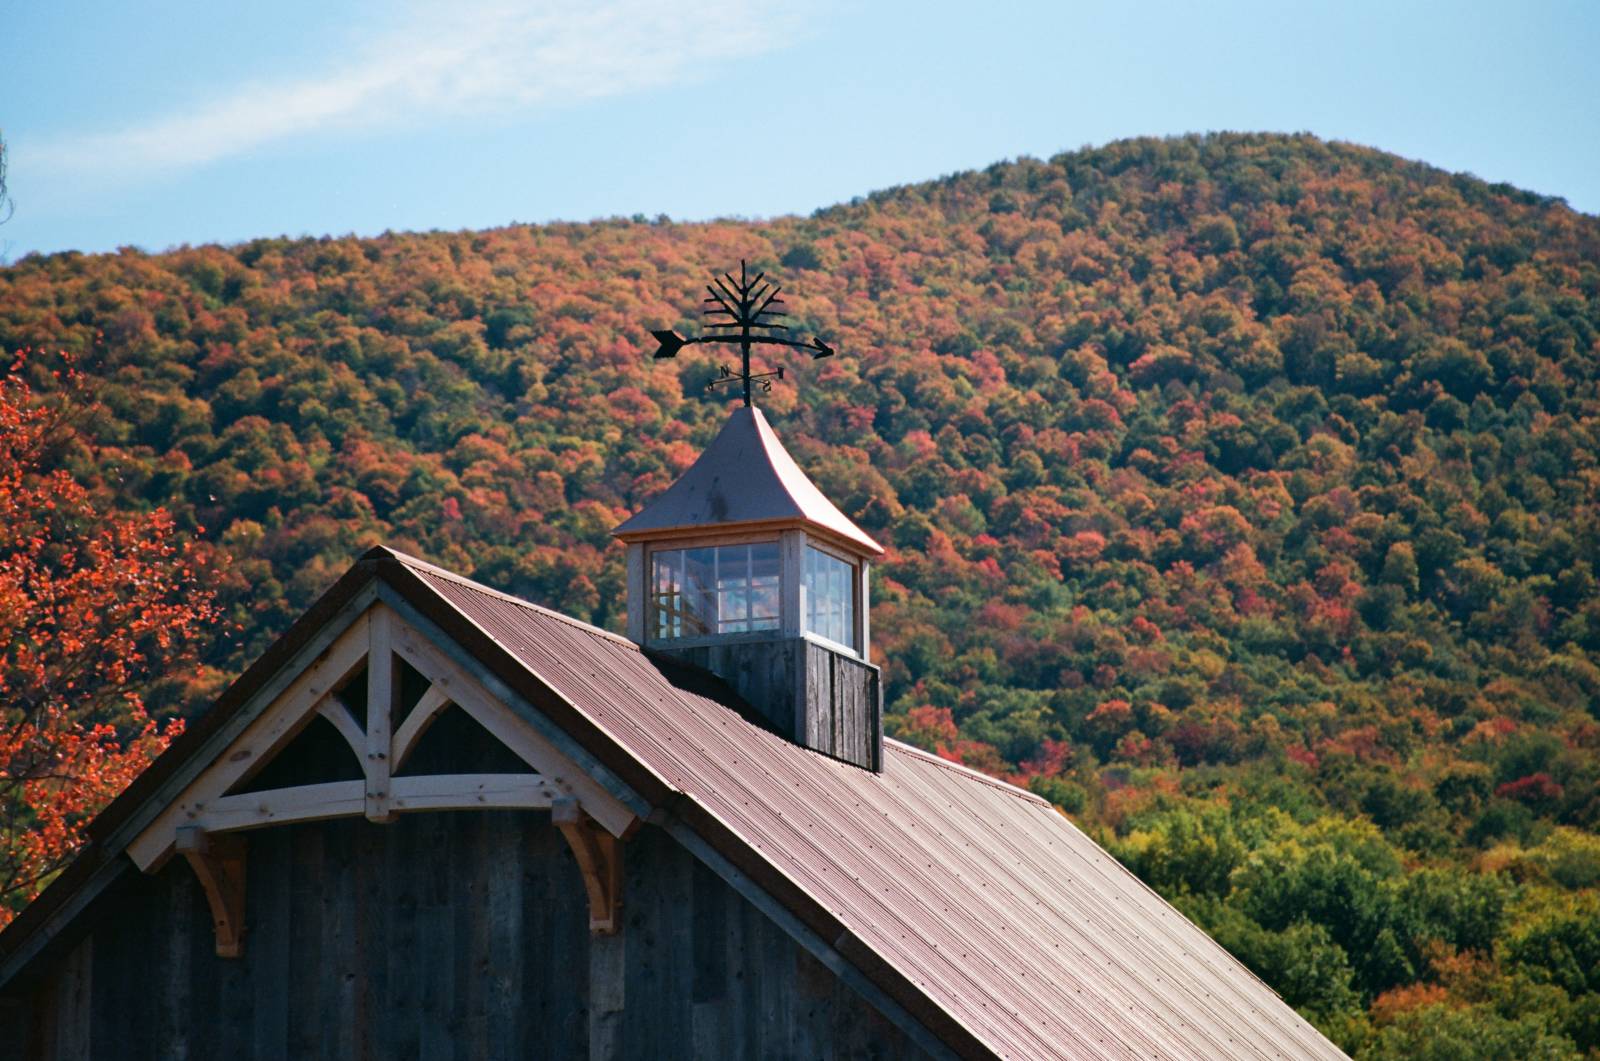 Cupola • Woodlife Ranch Custom Weathervane • Timber Frame Gable Accent • Rusty Metal Roof